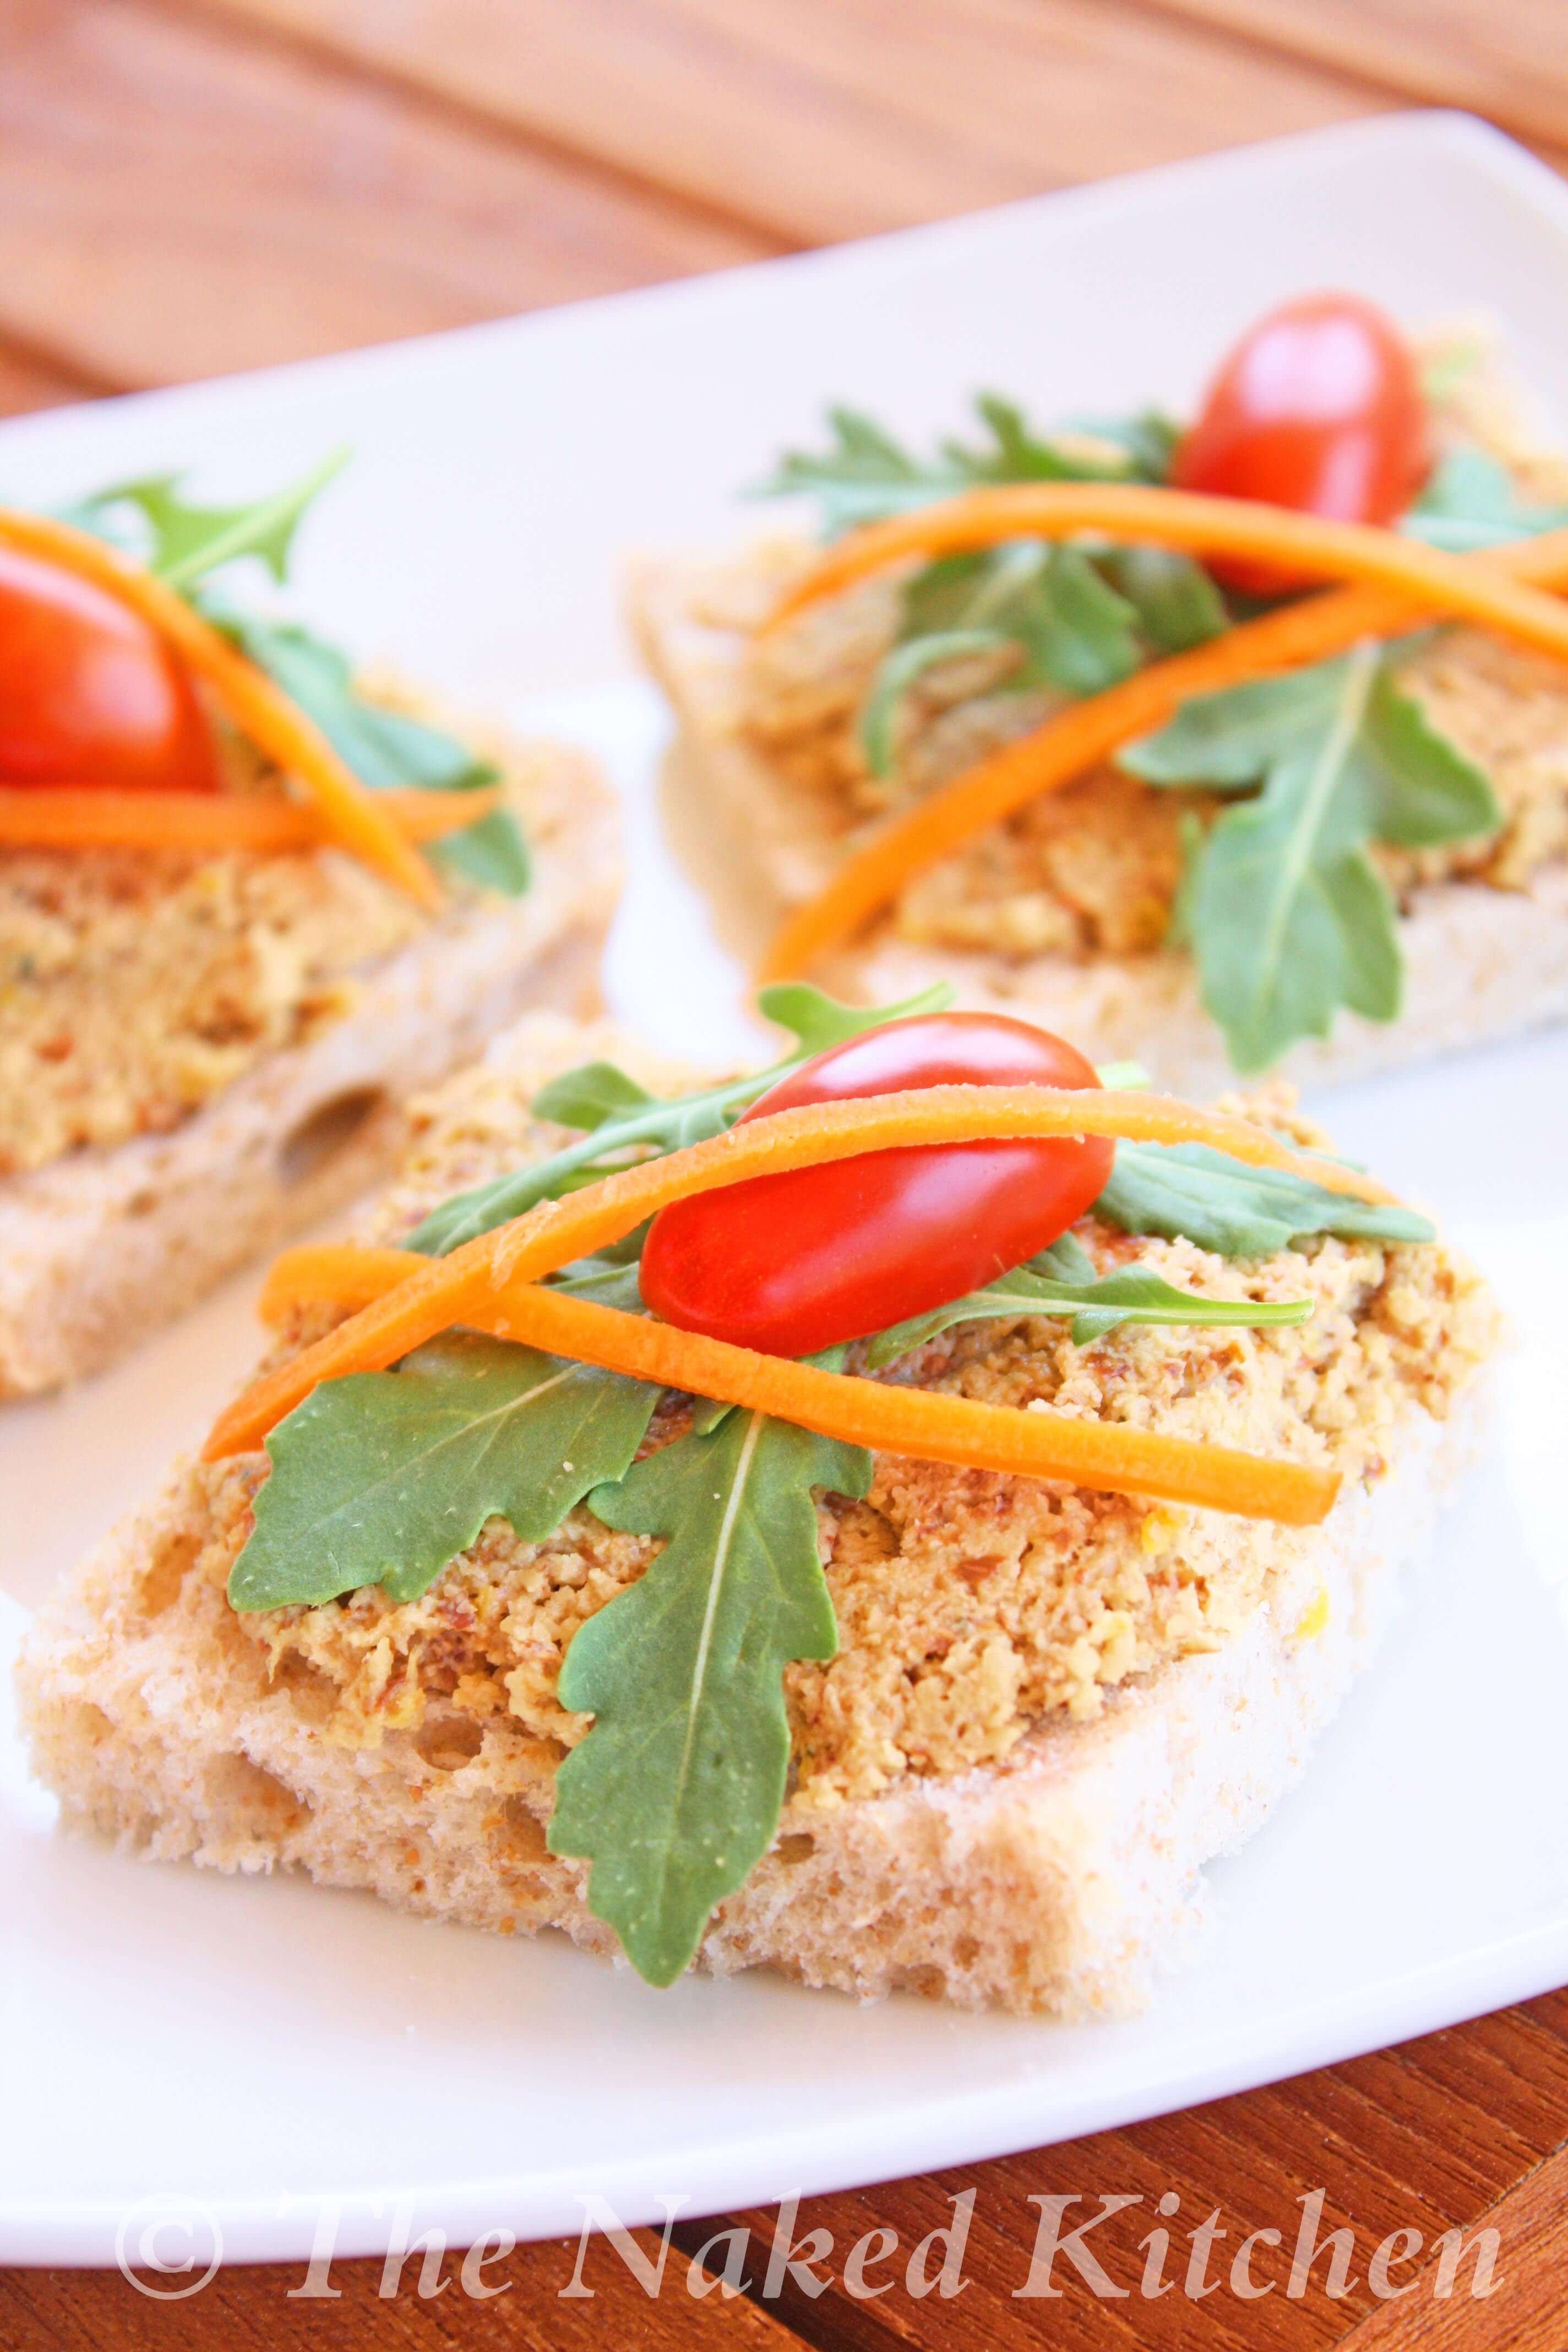 Toasted Almond and Pumpkin Seed Pate’